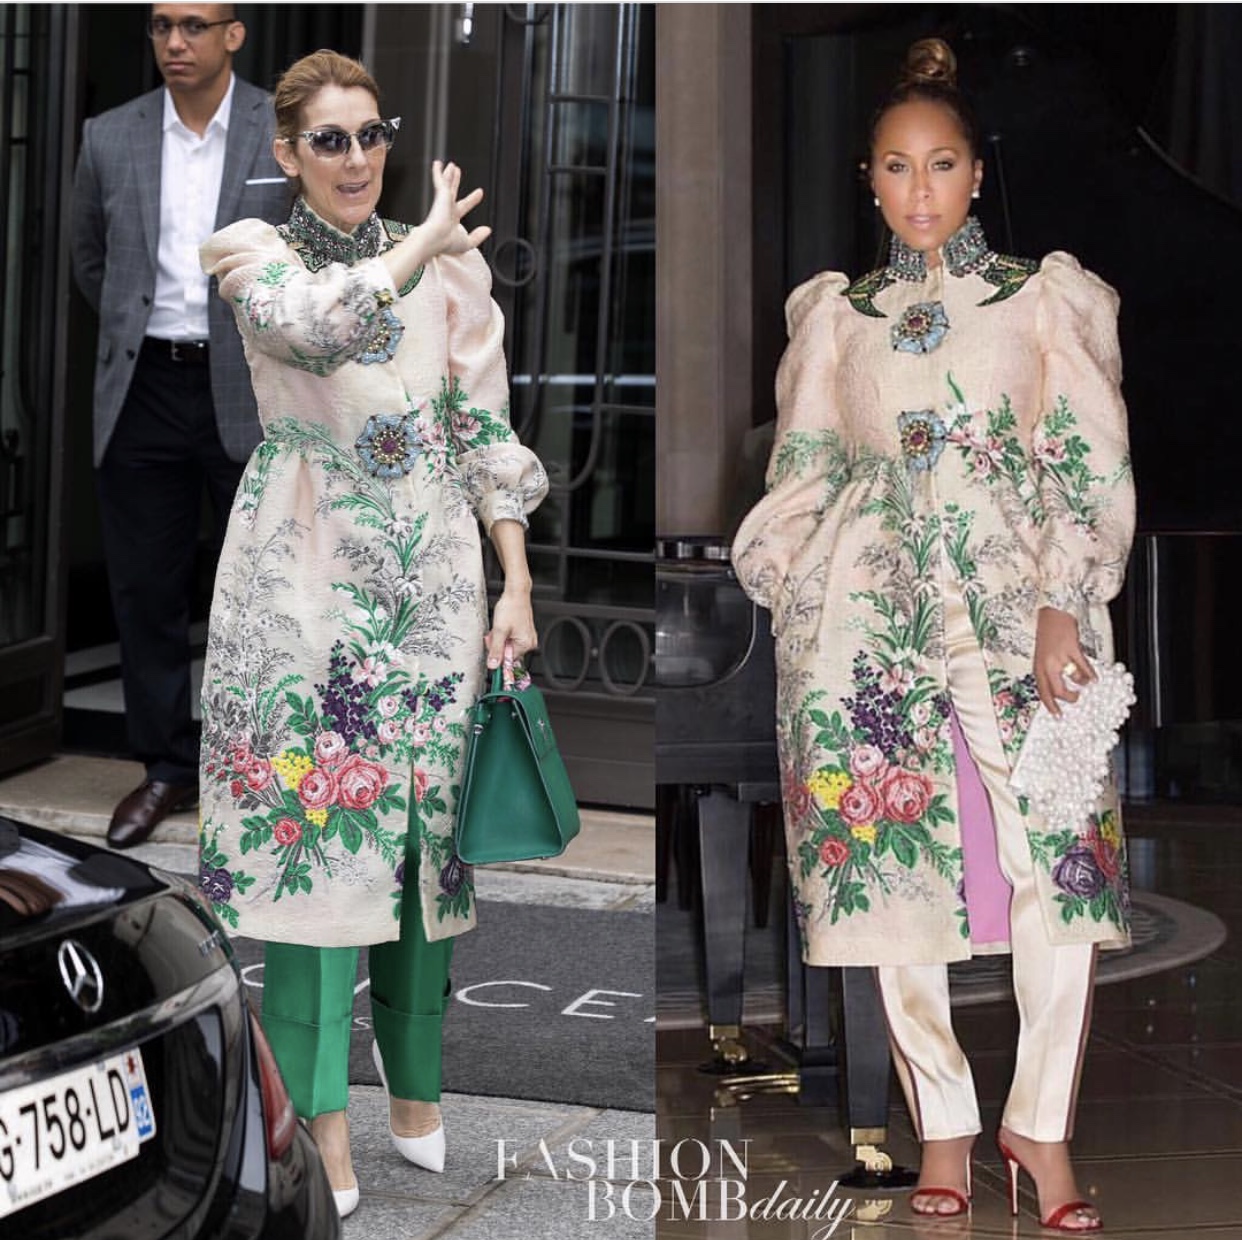 Marjorie Harvey – Page 2 – Fashion Bomb Daily